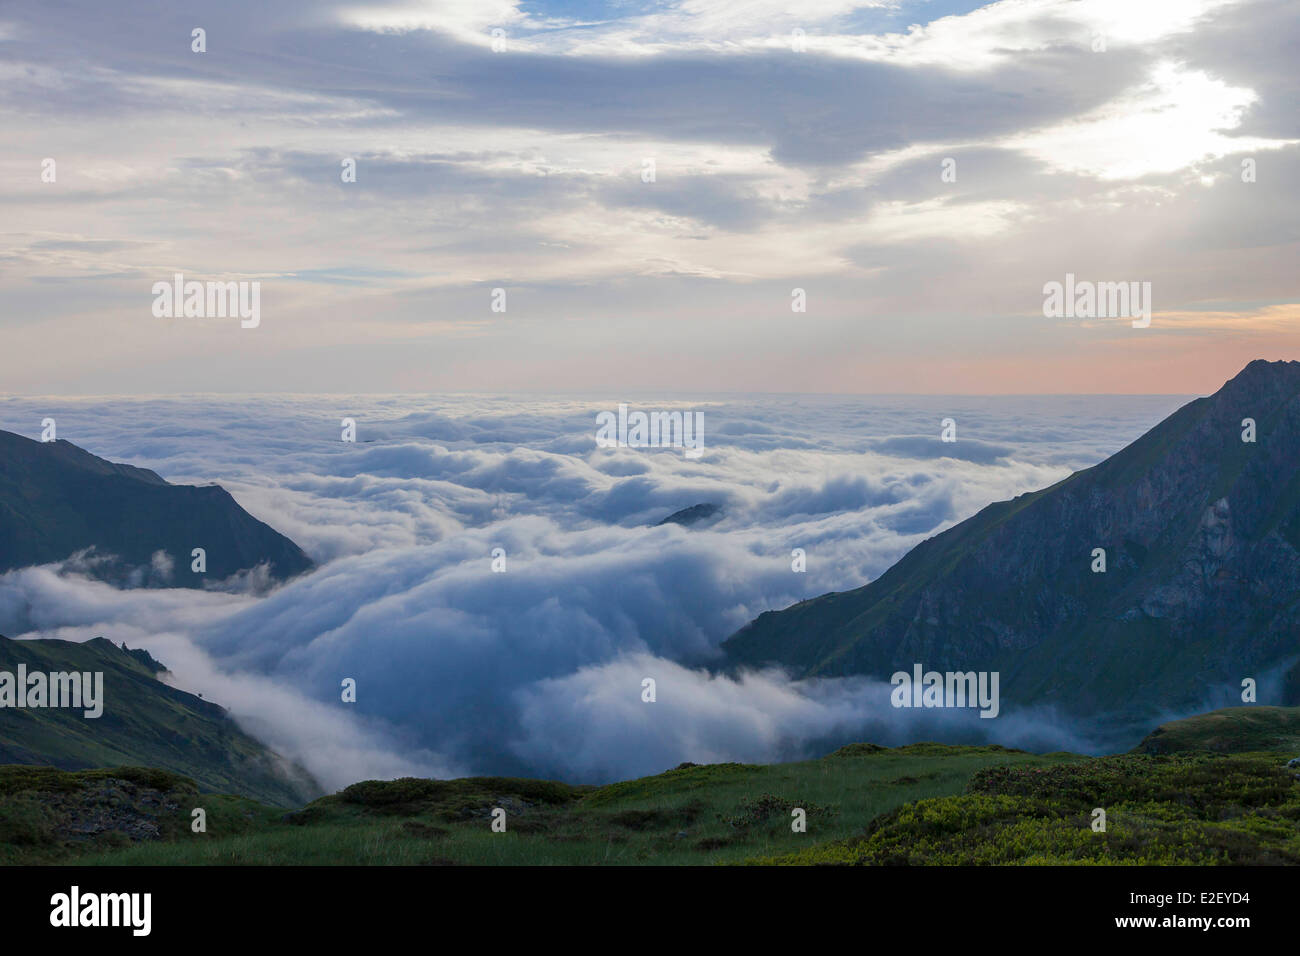 France, Ariege, Sentein, Couserans, sunrise over the Biros valley Stock Photo